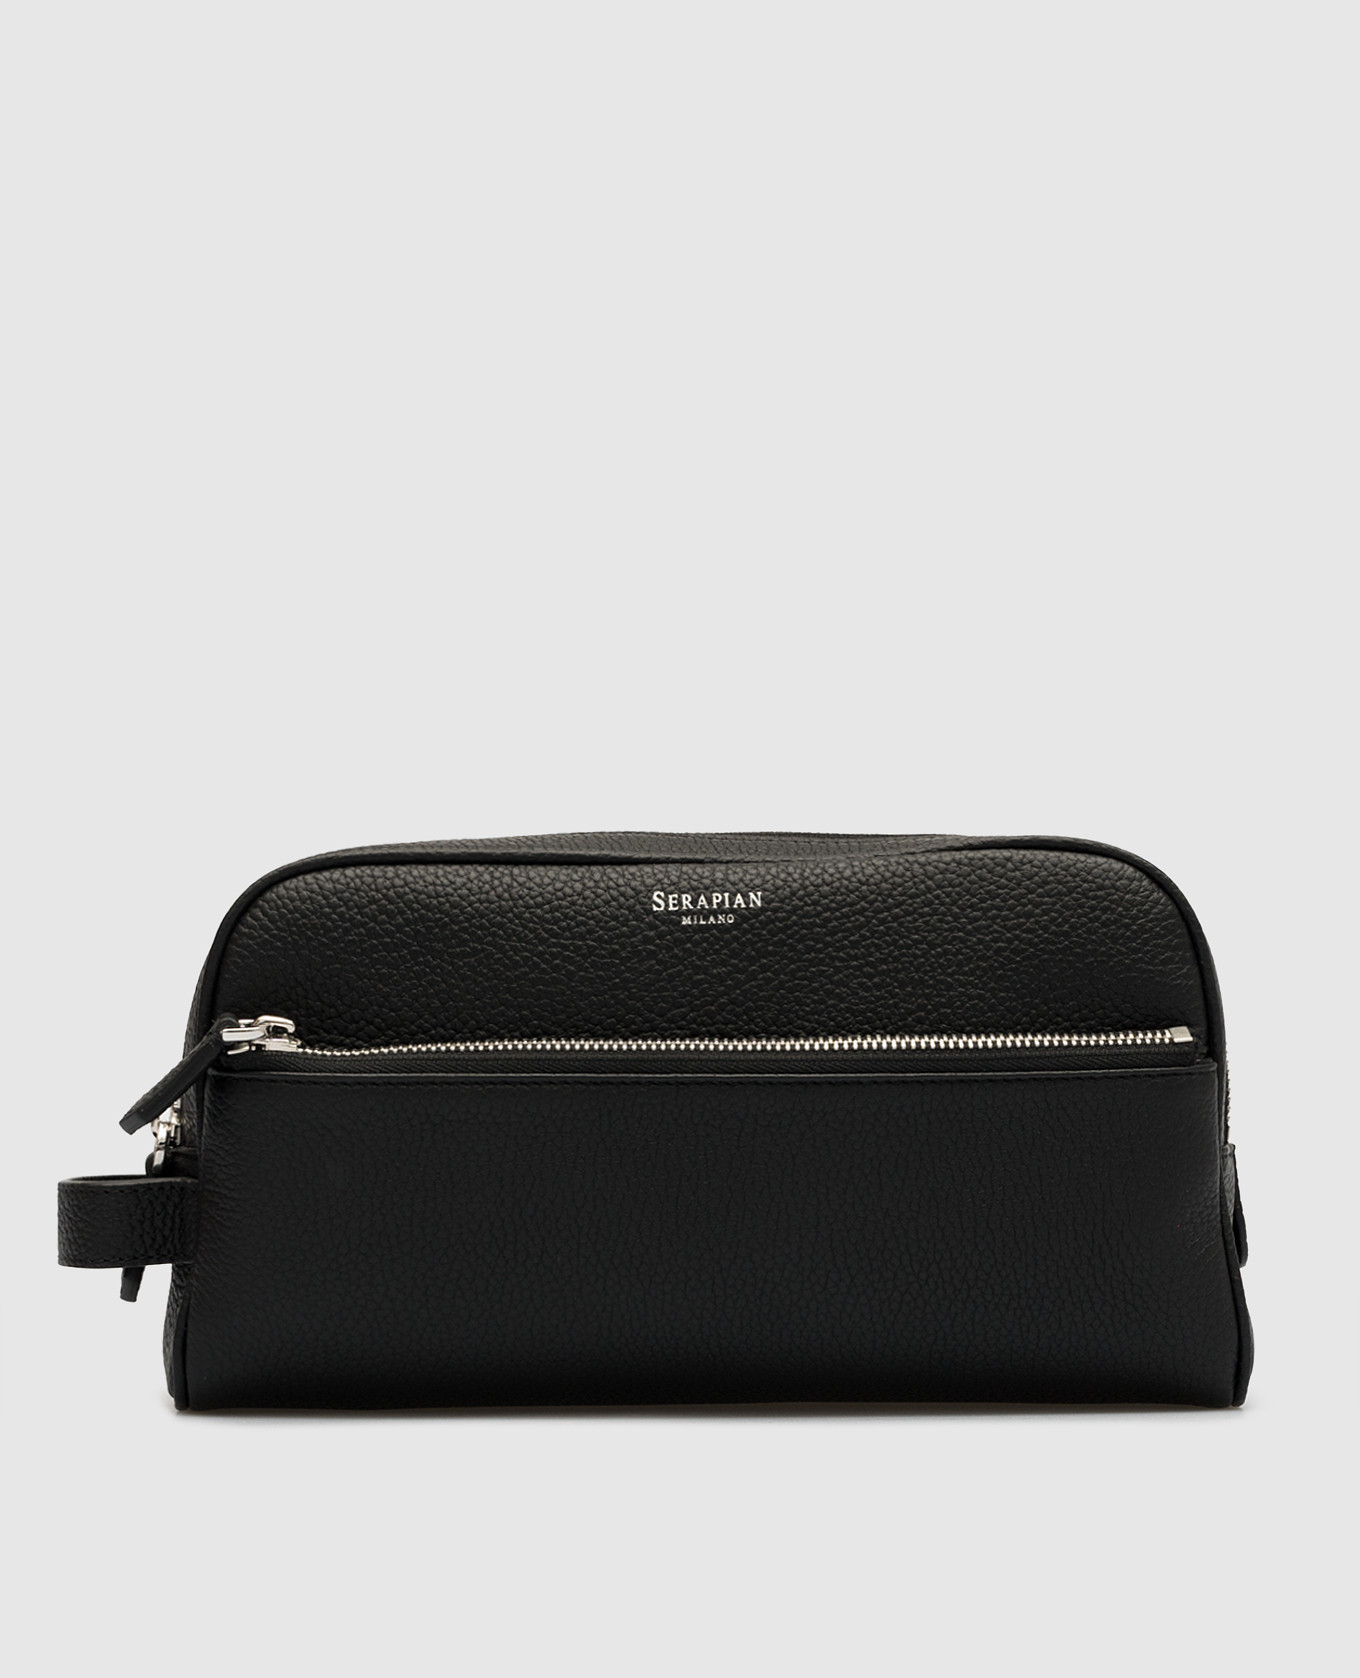 Black leather toiletry bag